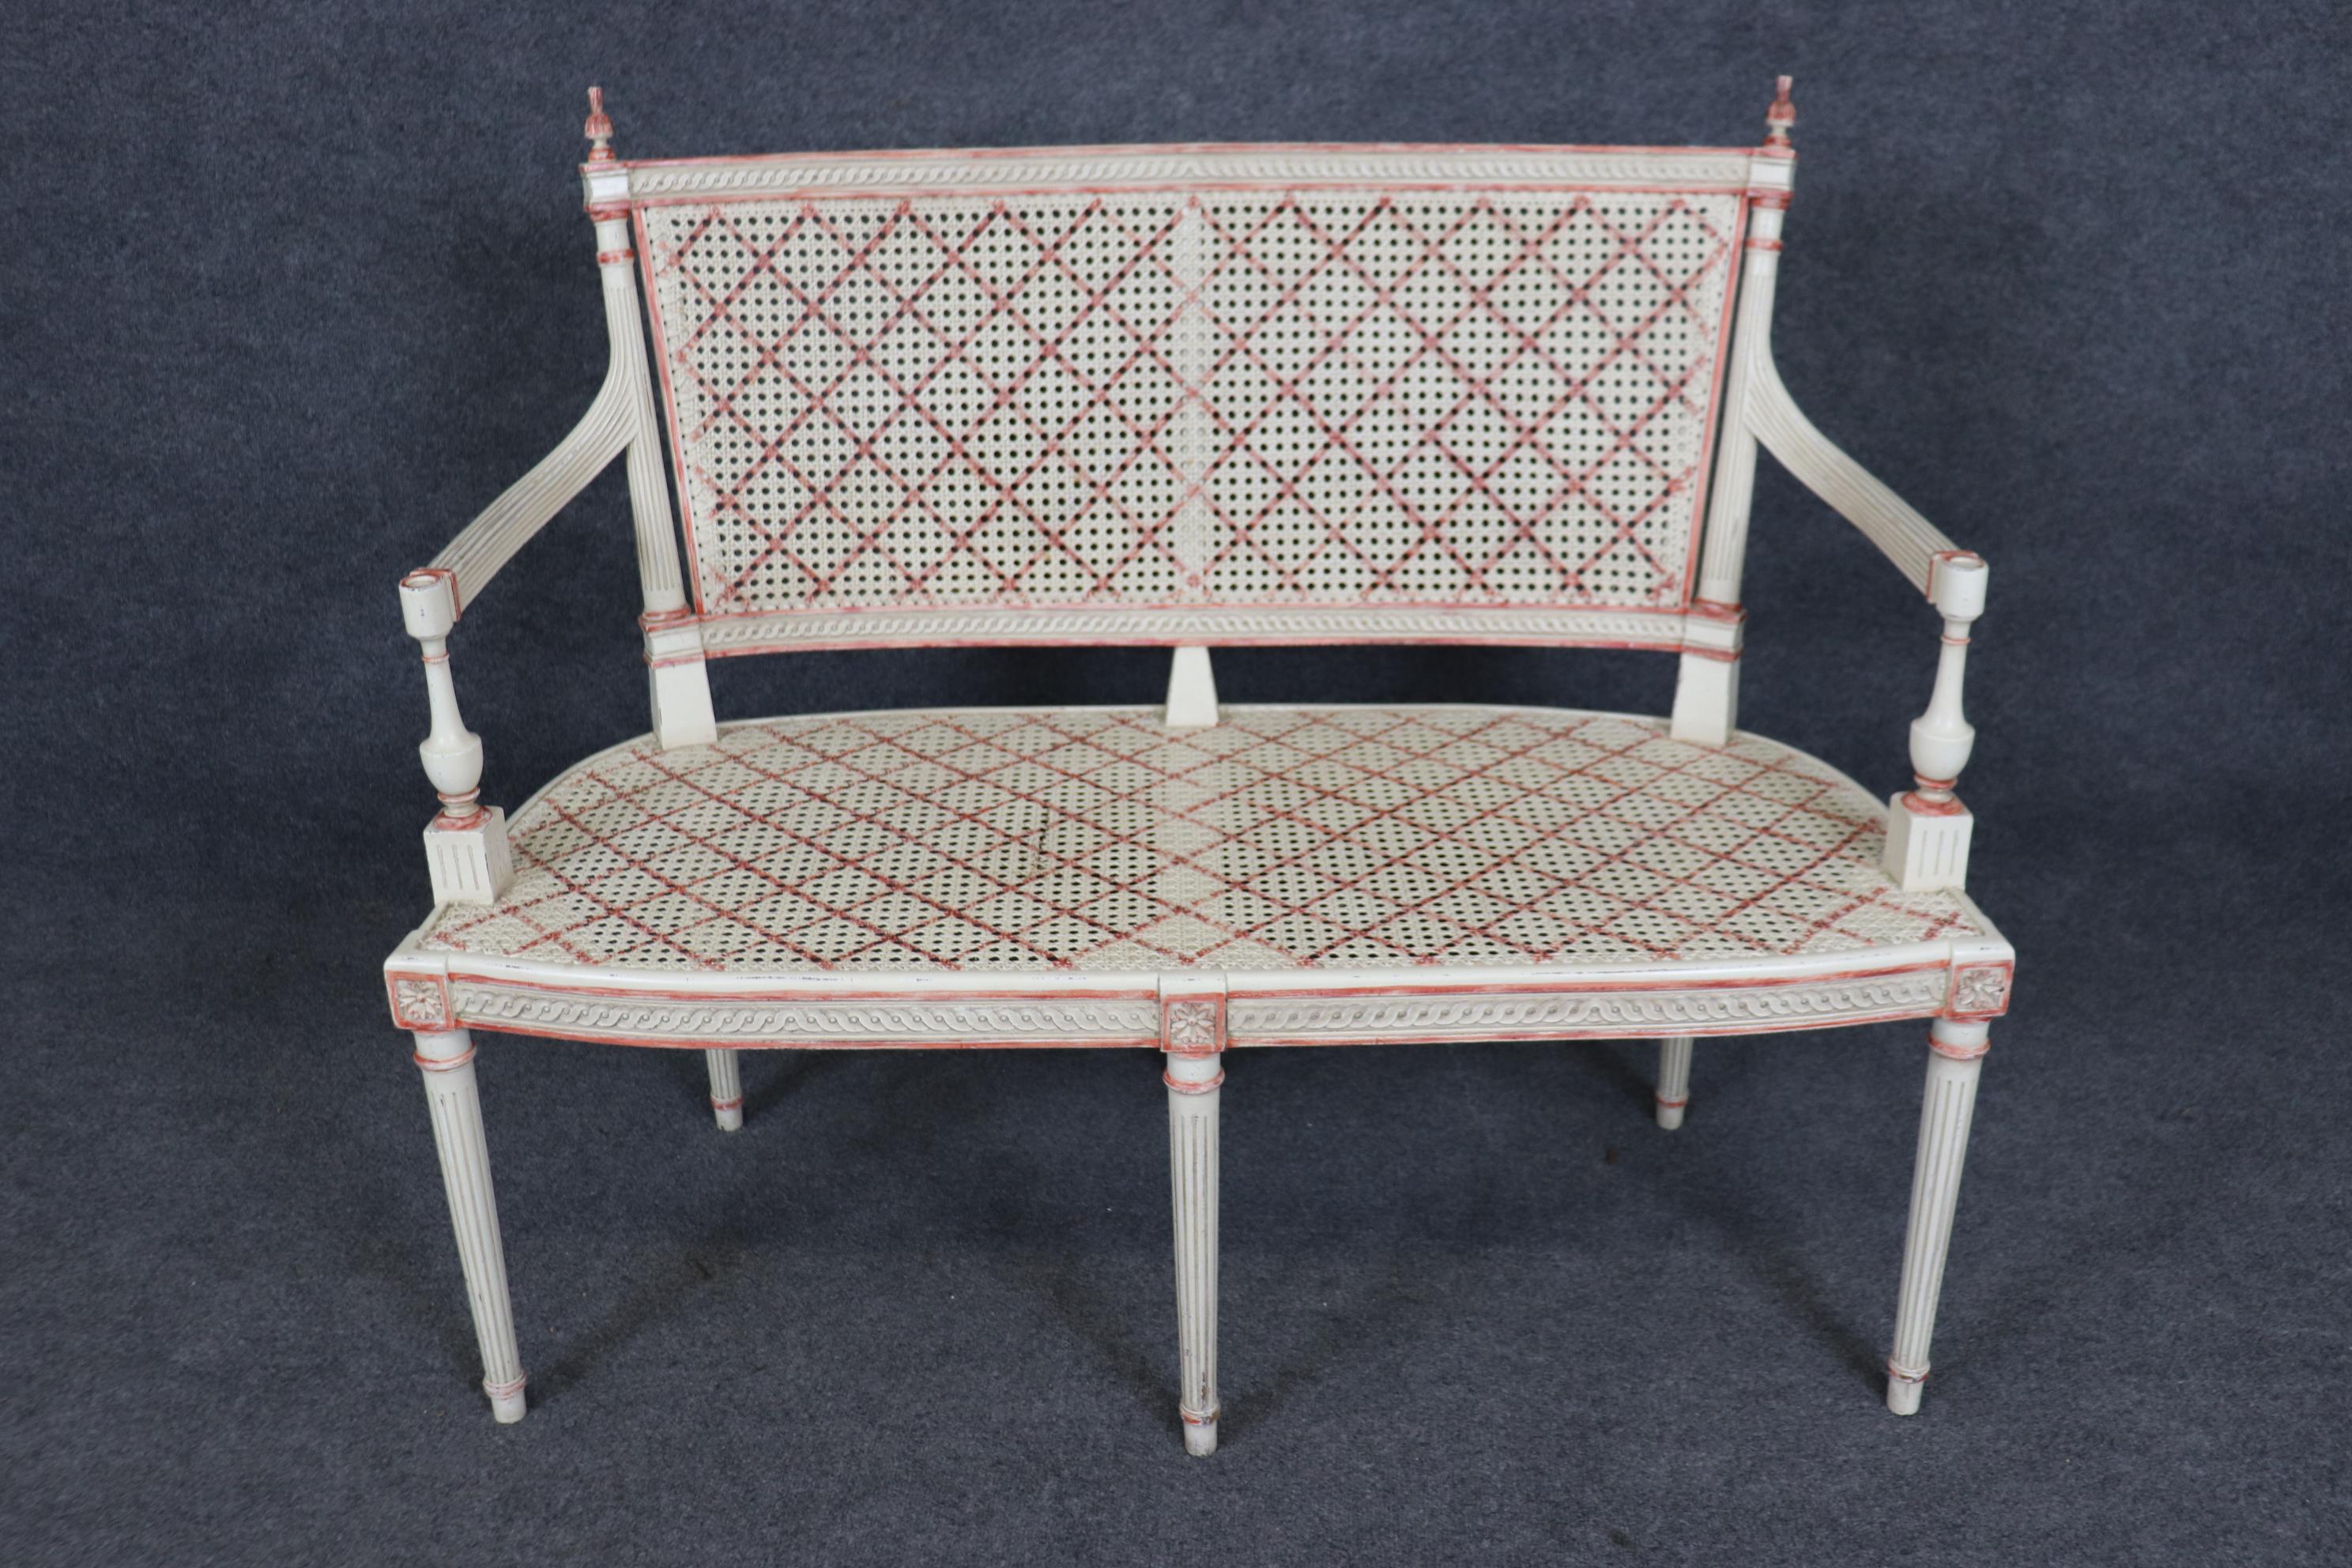 This is a gorgeous painted settee with cross hatched red glazed decoration and a green upholstered removable cushion. The cane is in good condition as is the rest of the frame. The settee has normal age-appropriate signs of wear and signs of use.